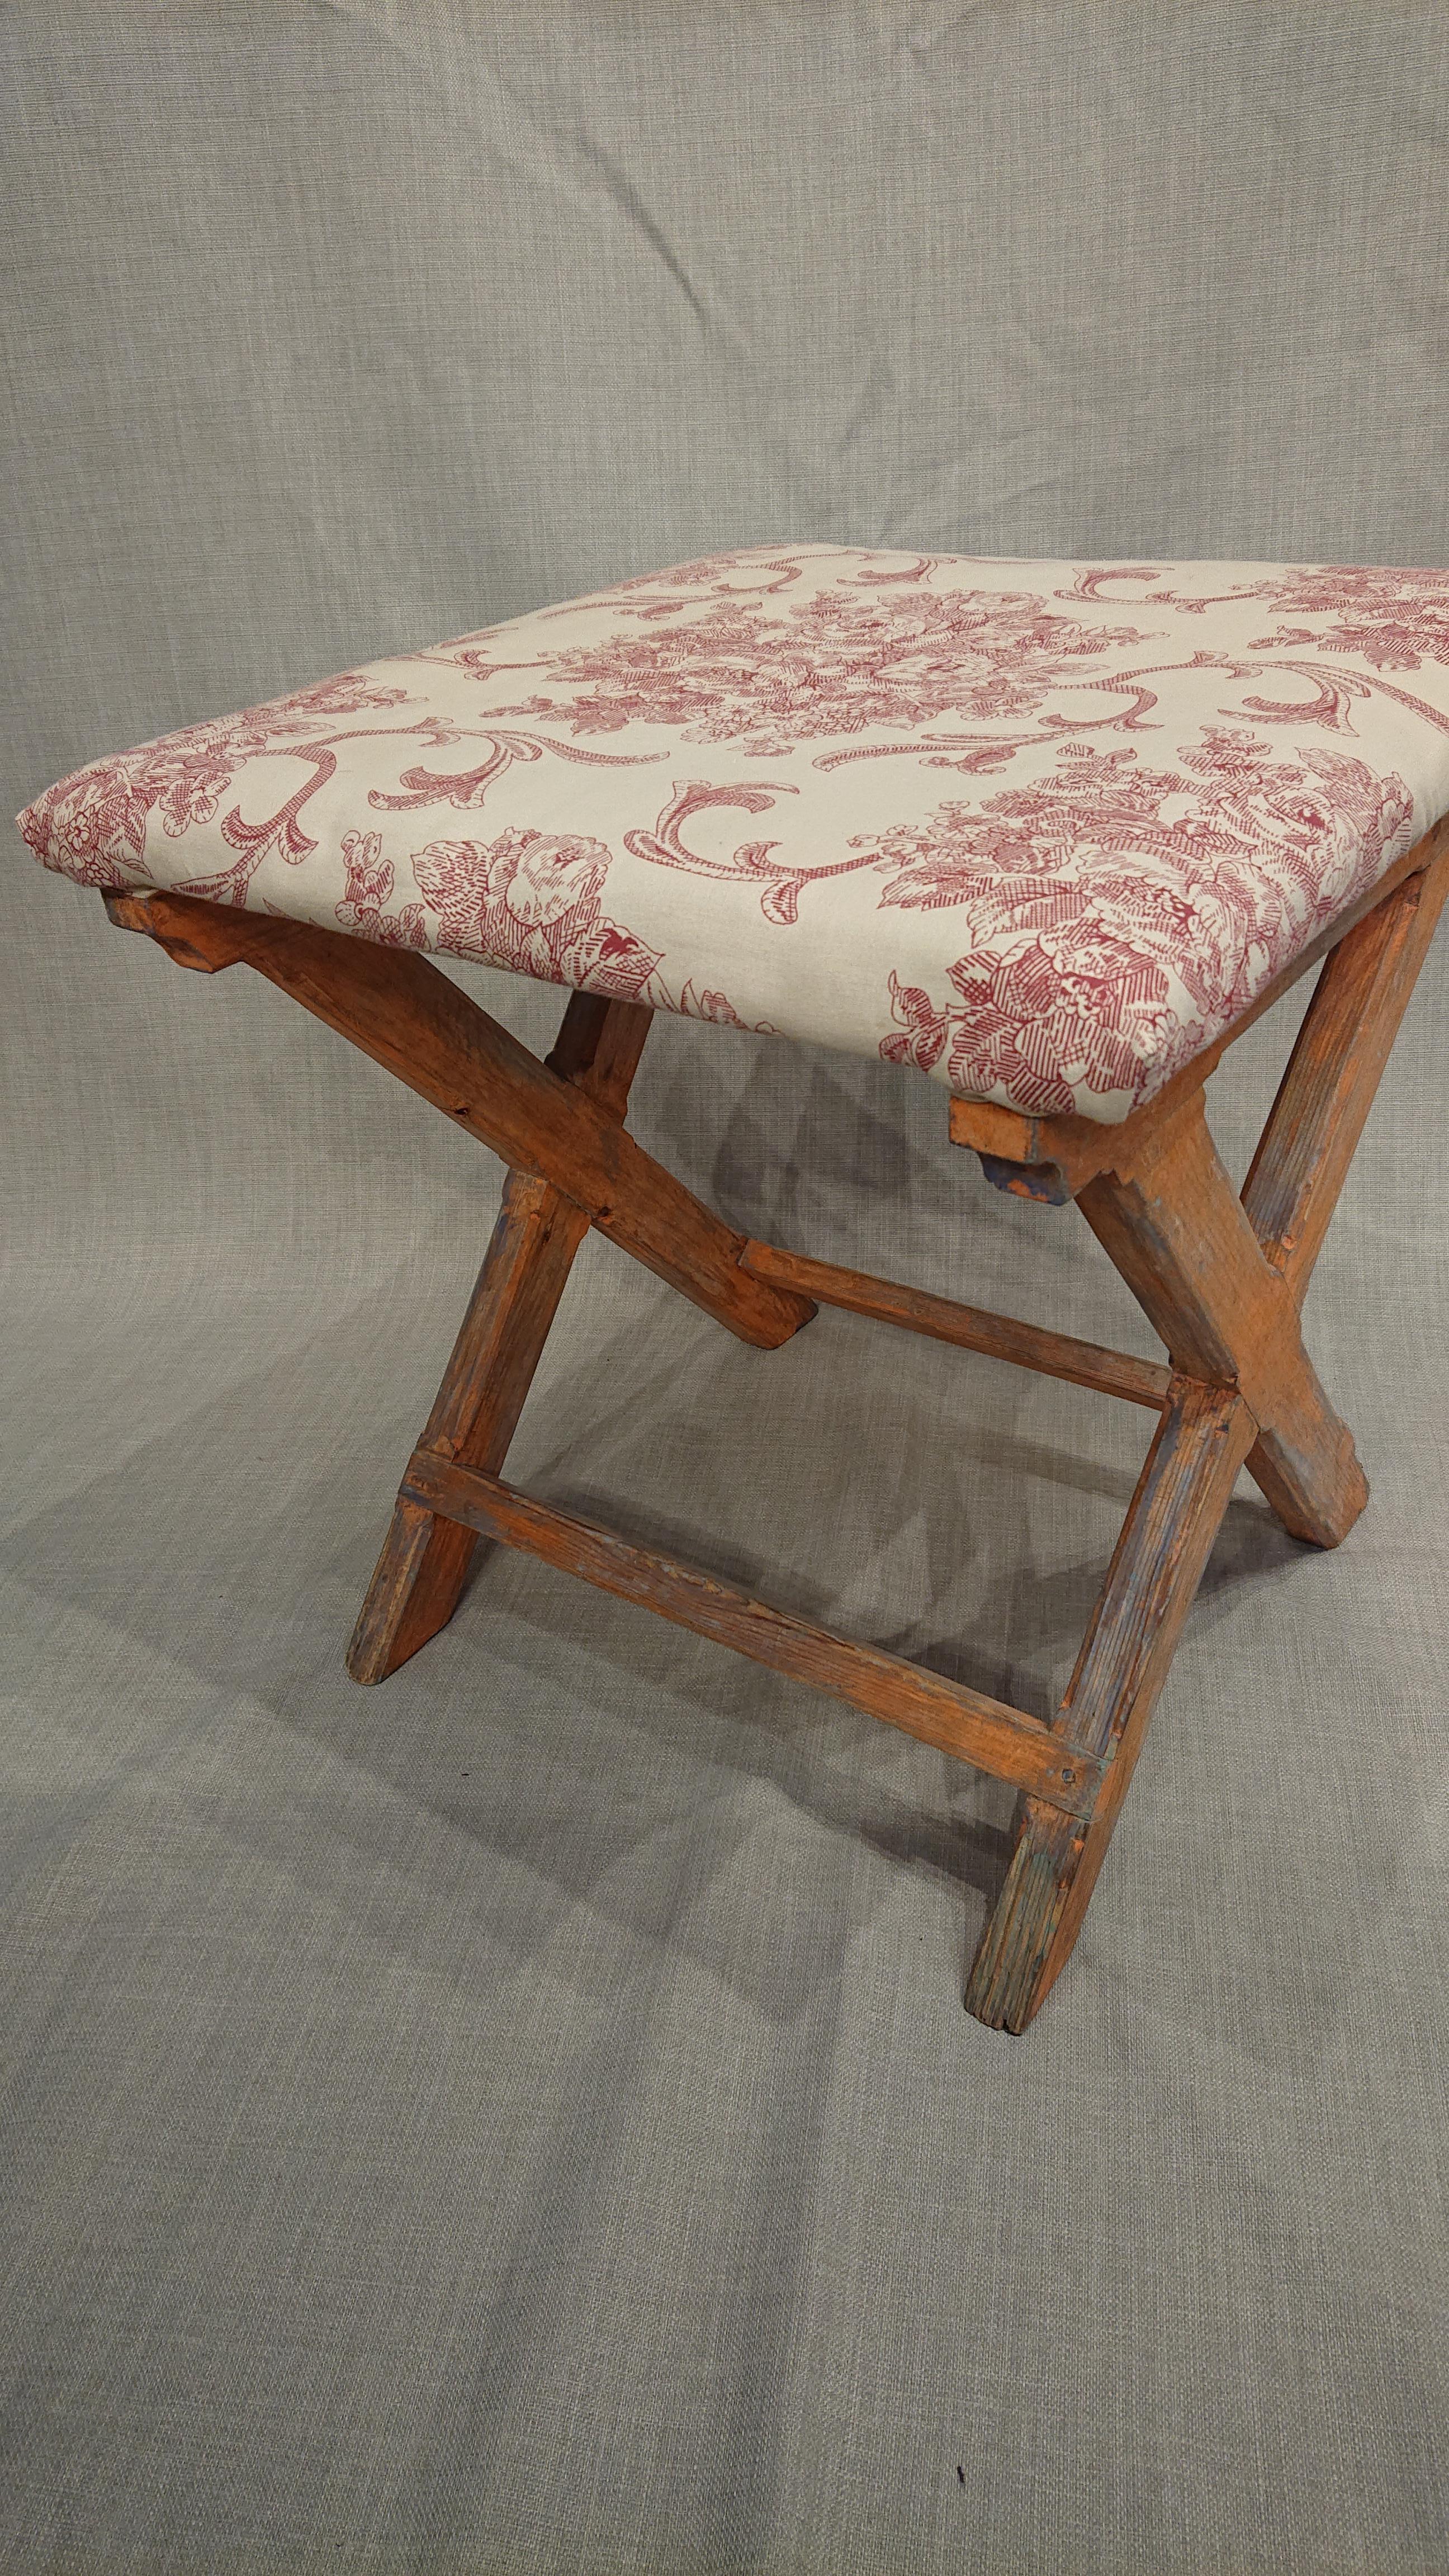 19th Century Gustavian Stool with Original Paint In Good Condition For Sale In Boden, SE